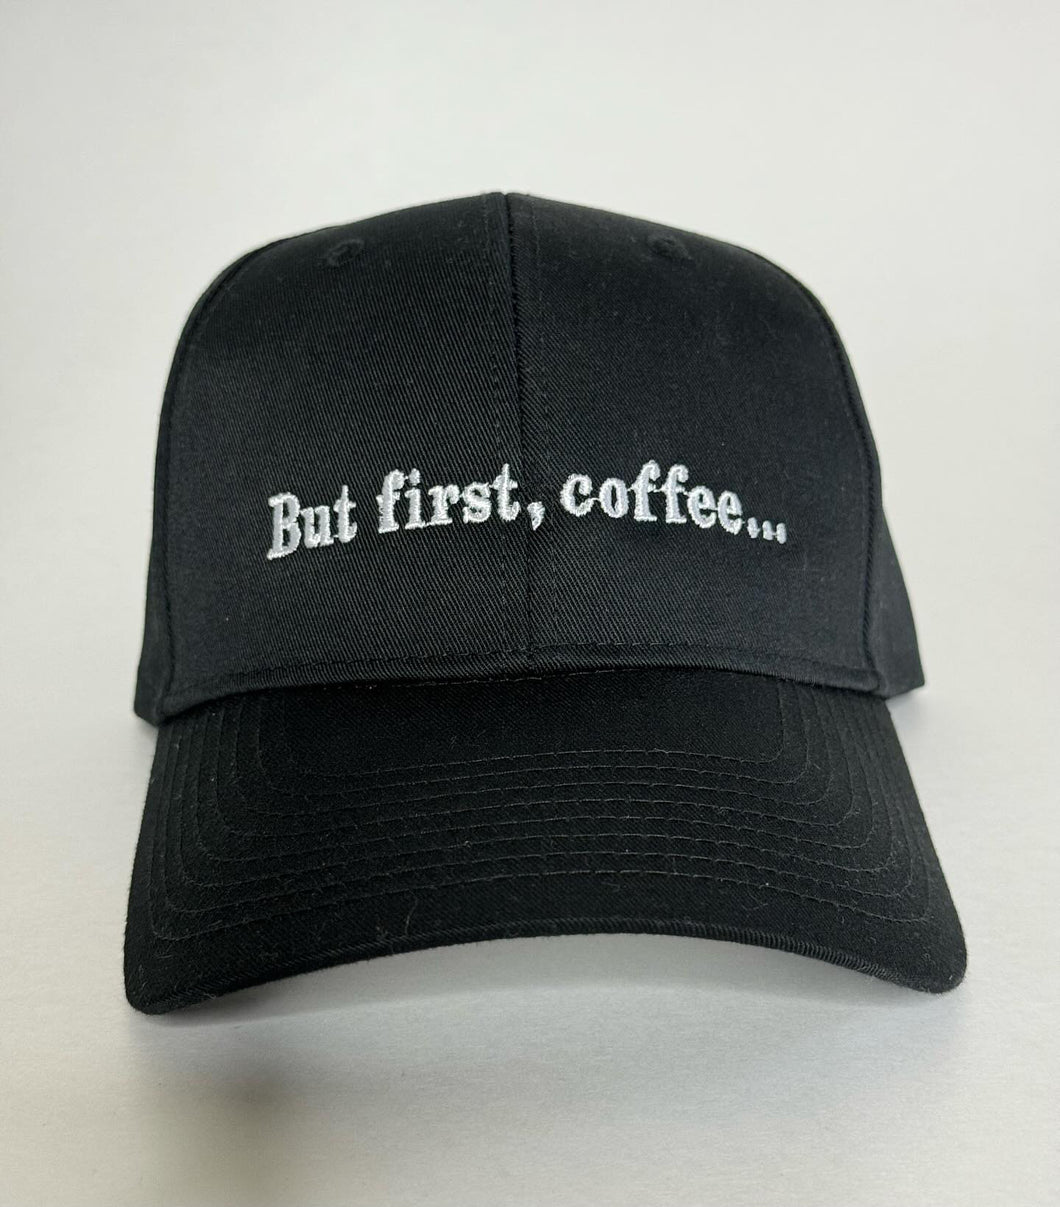 Black “But first, coffee” Embroidered Cap